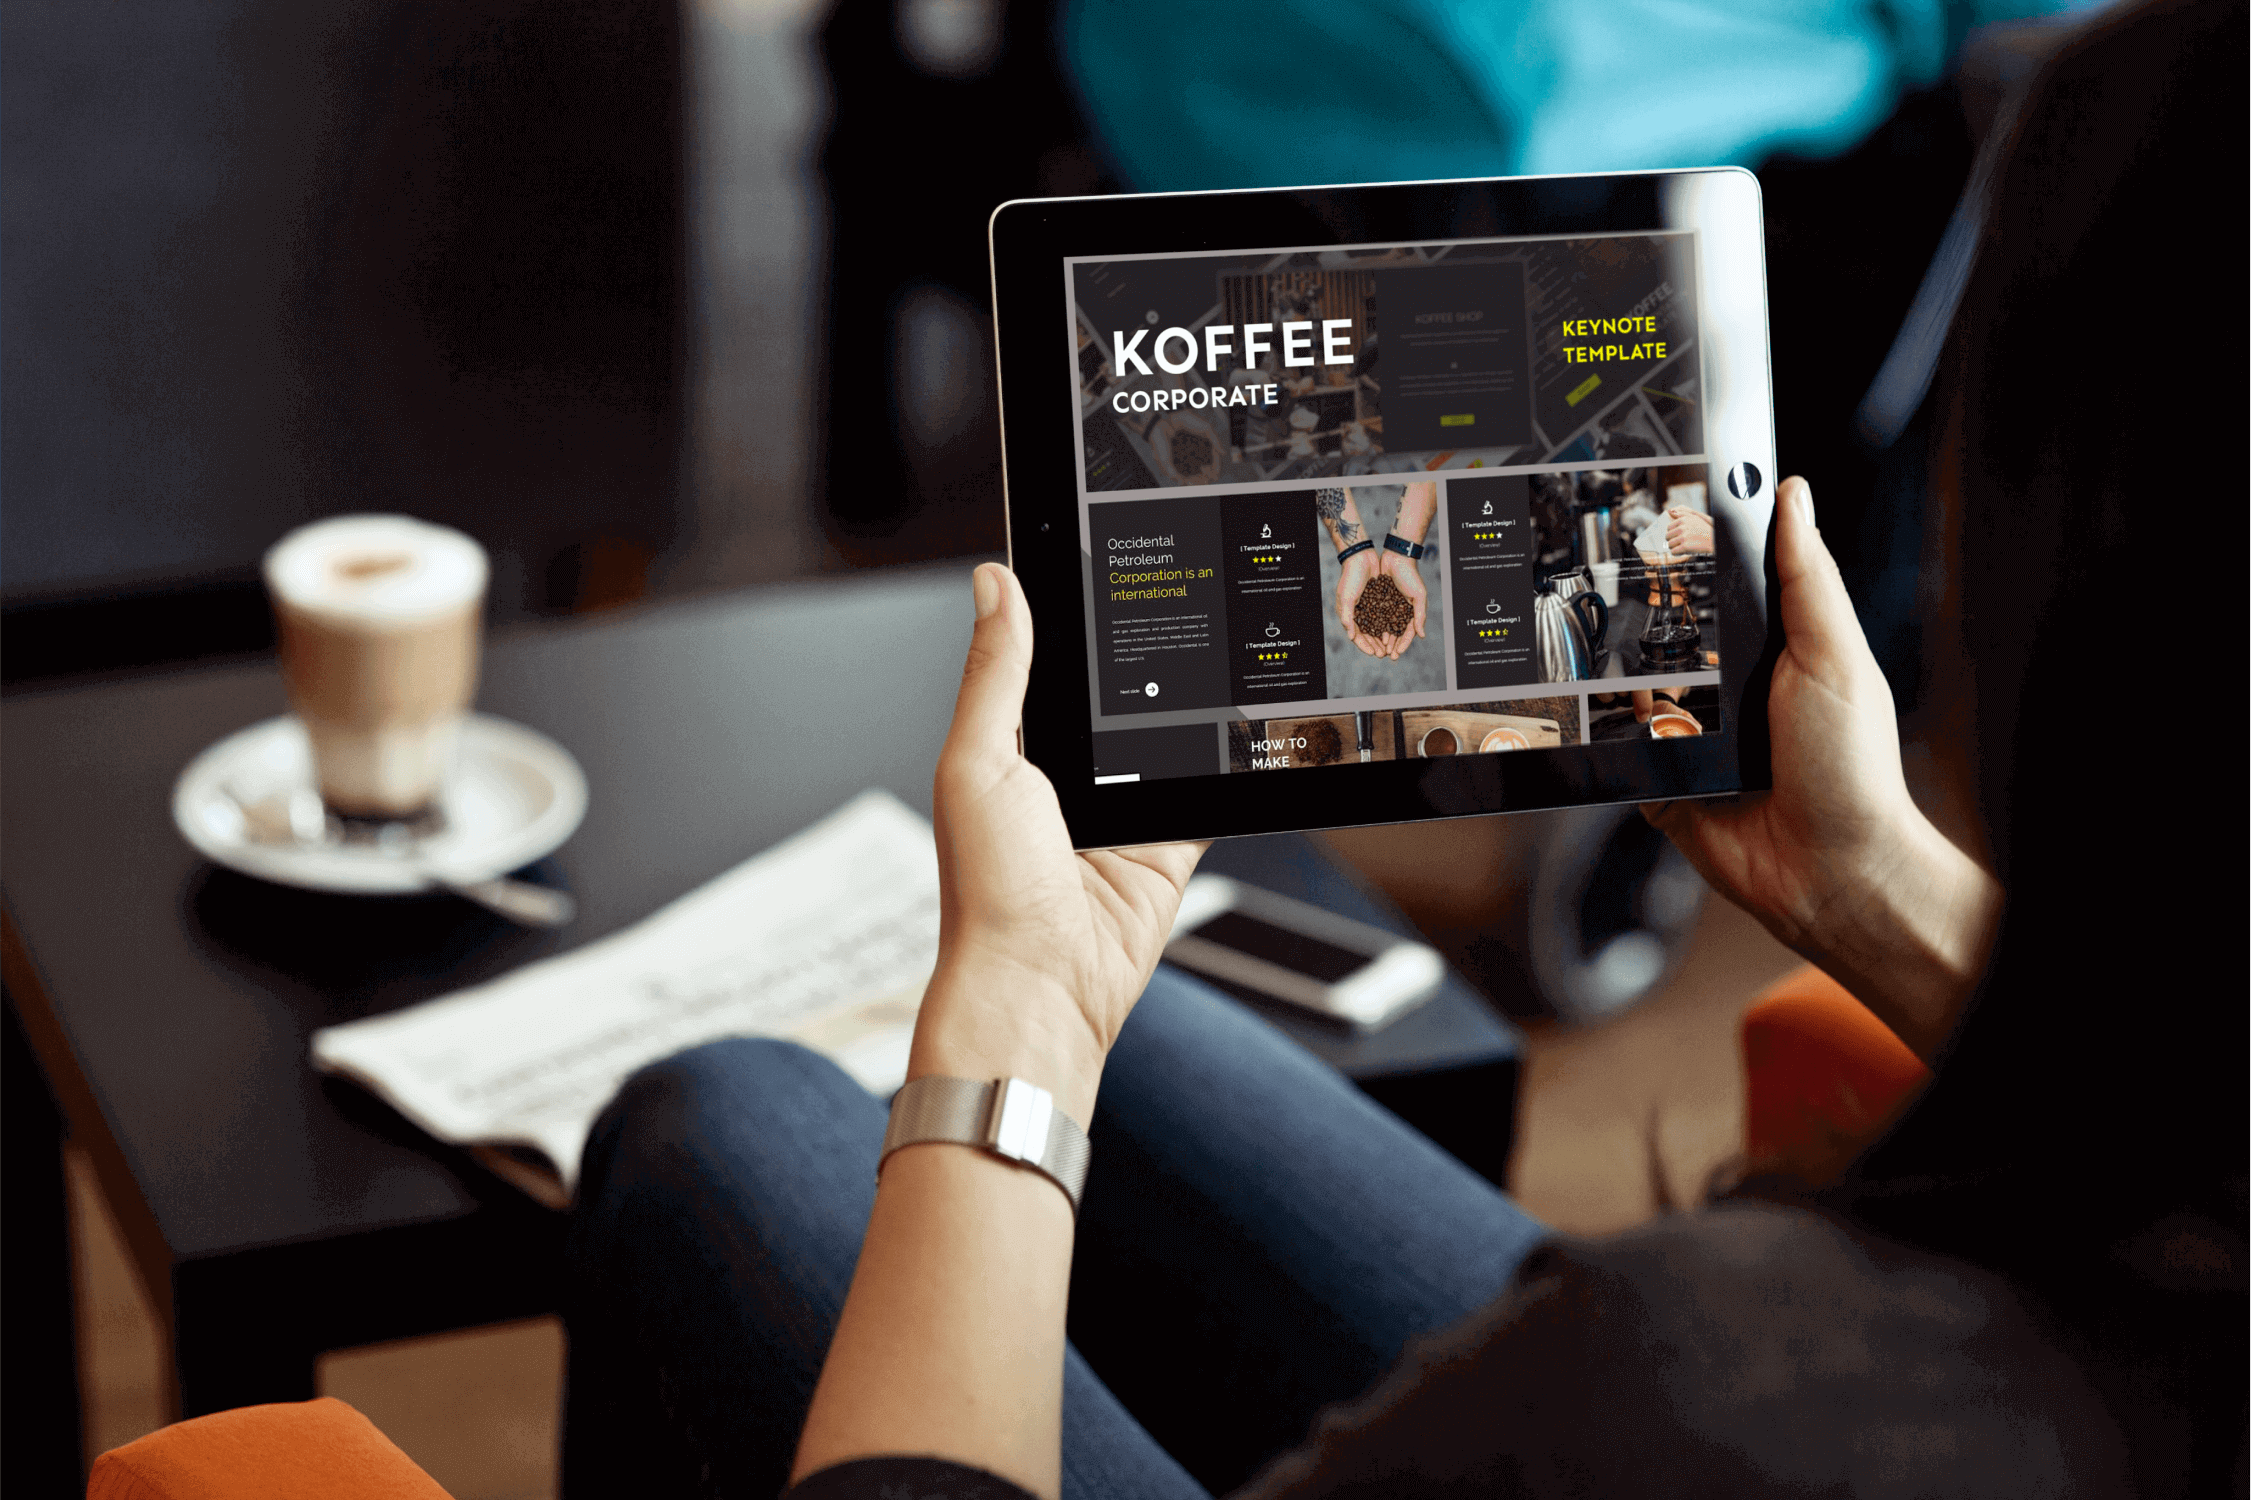 Preview Koffee Corporate - Keynote Template on Tablet.